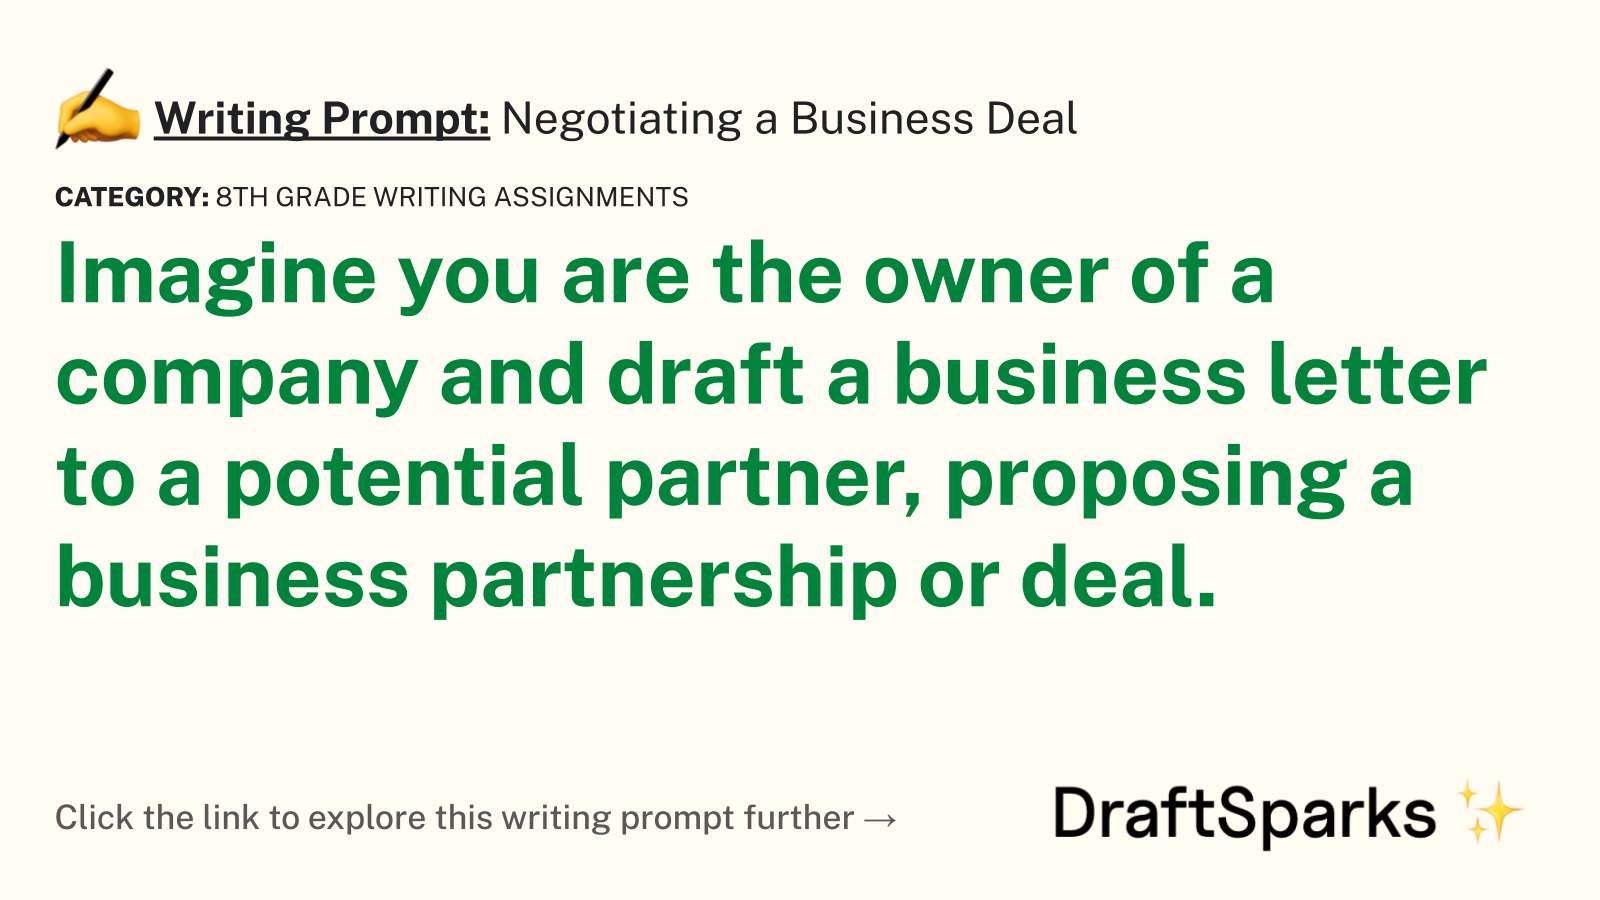 Negotiating a Business Deal